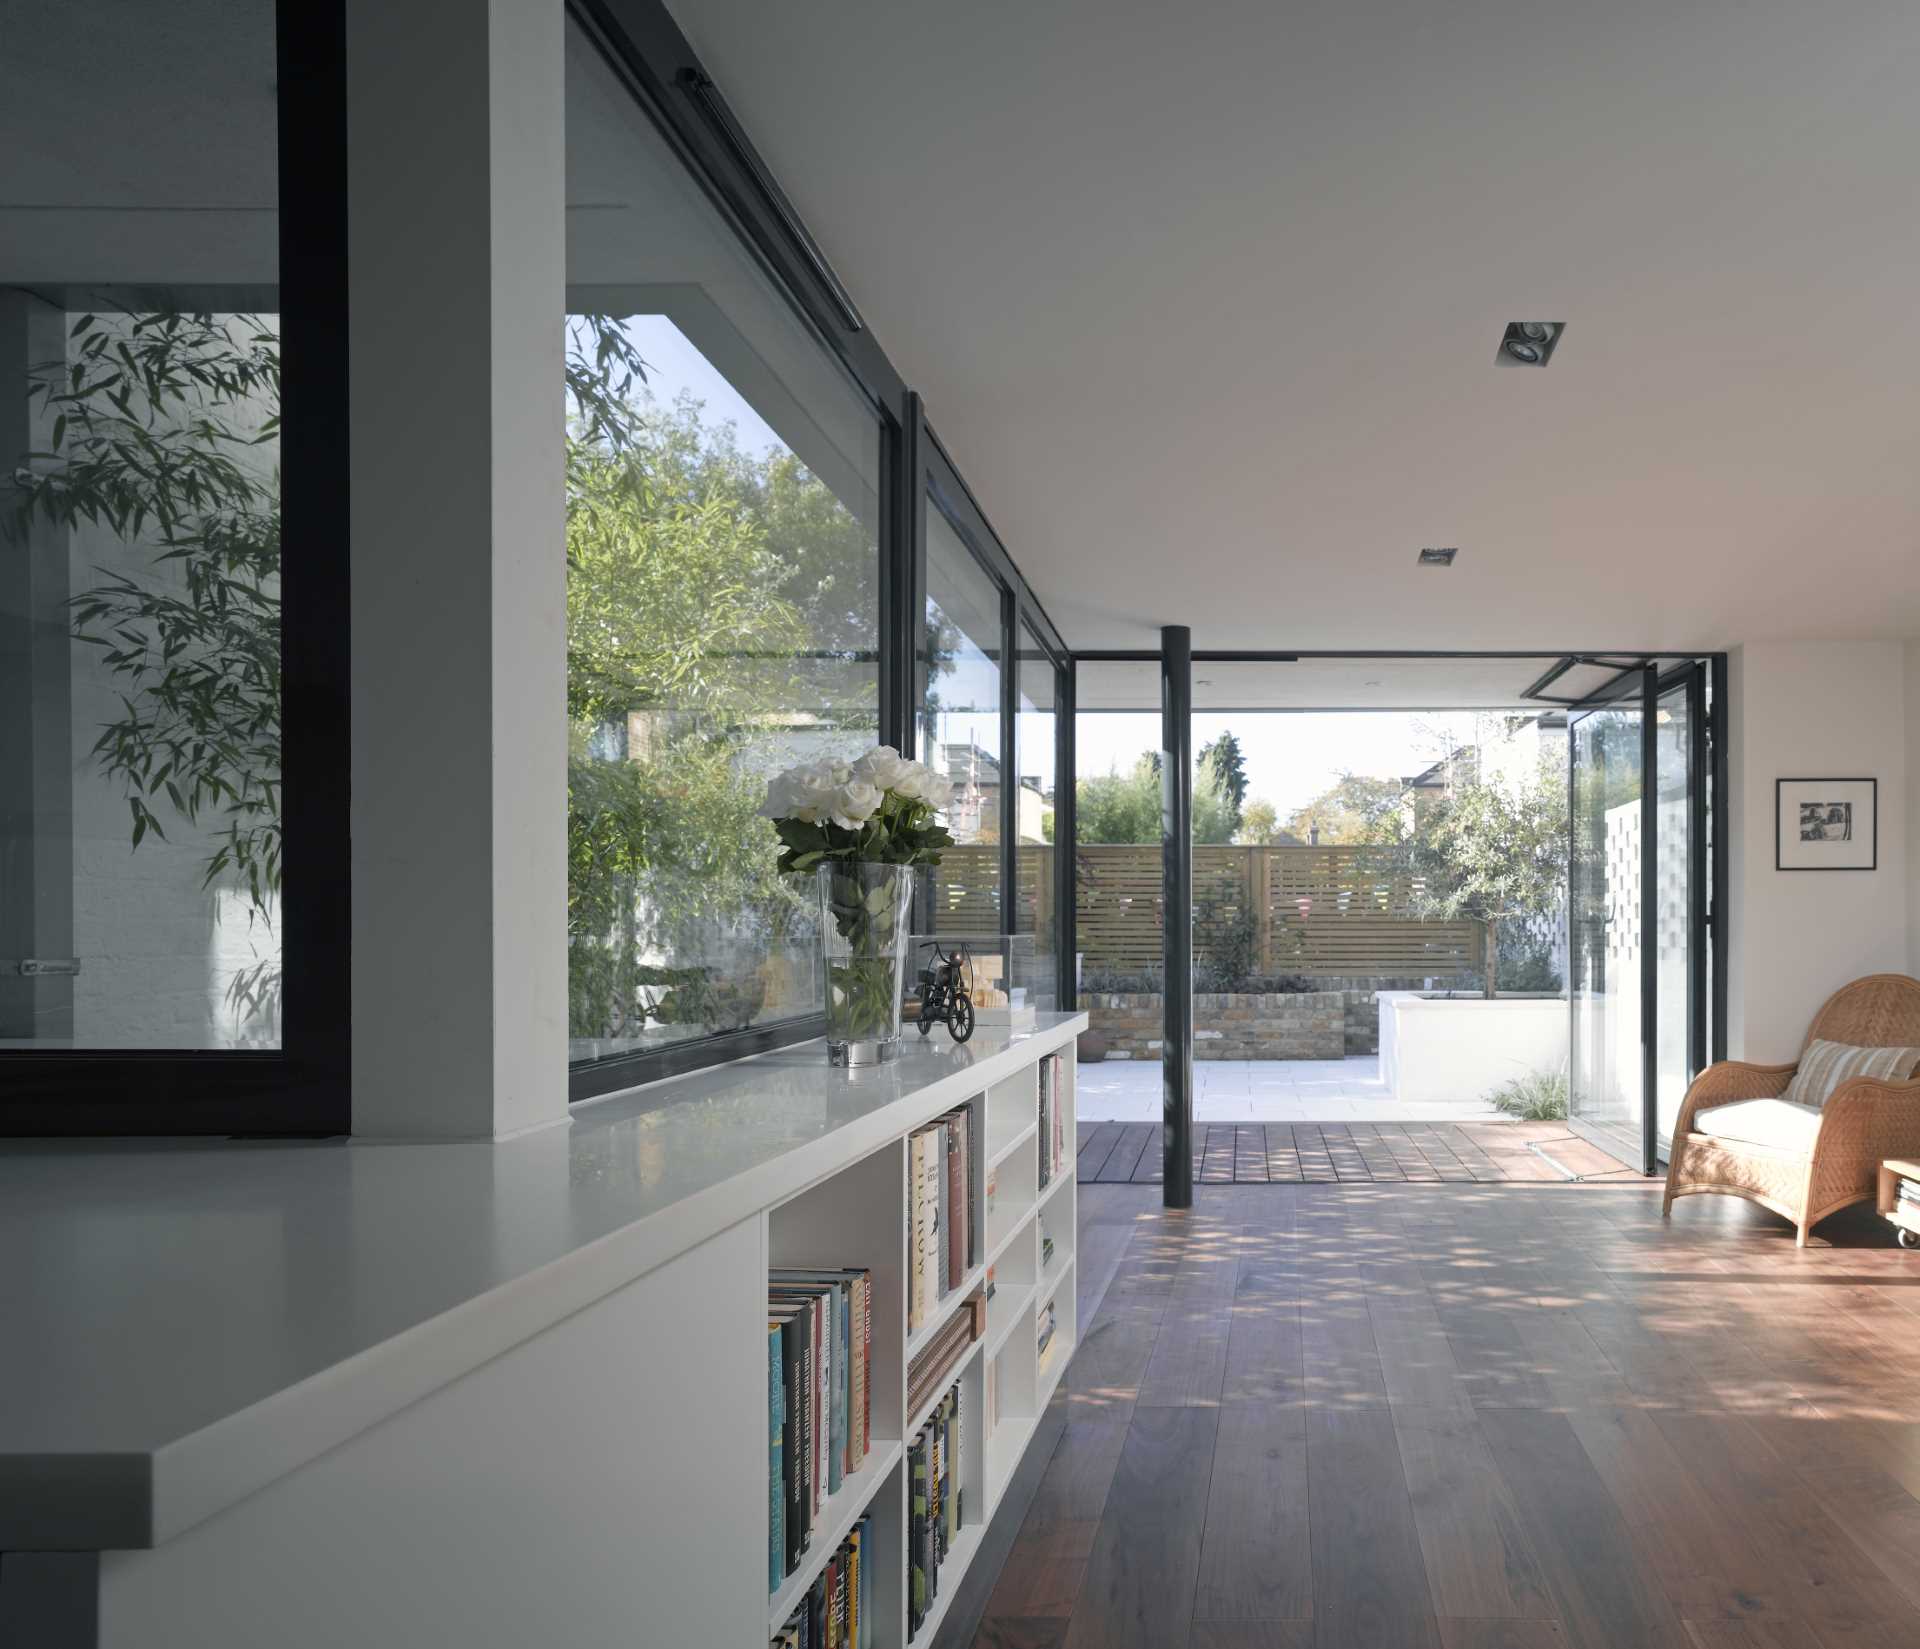 A garden room, which is filled with natural light, includes a white bookshelf under the window.